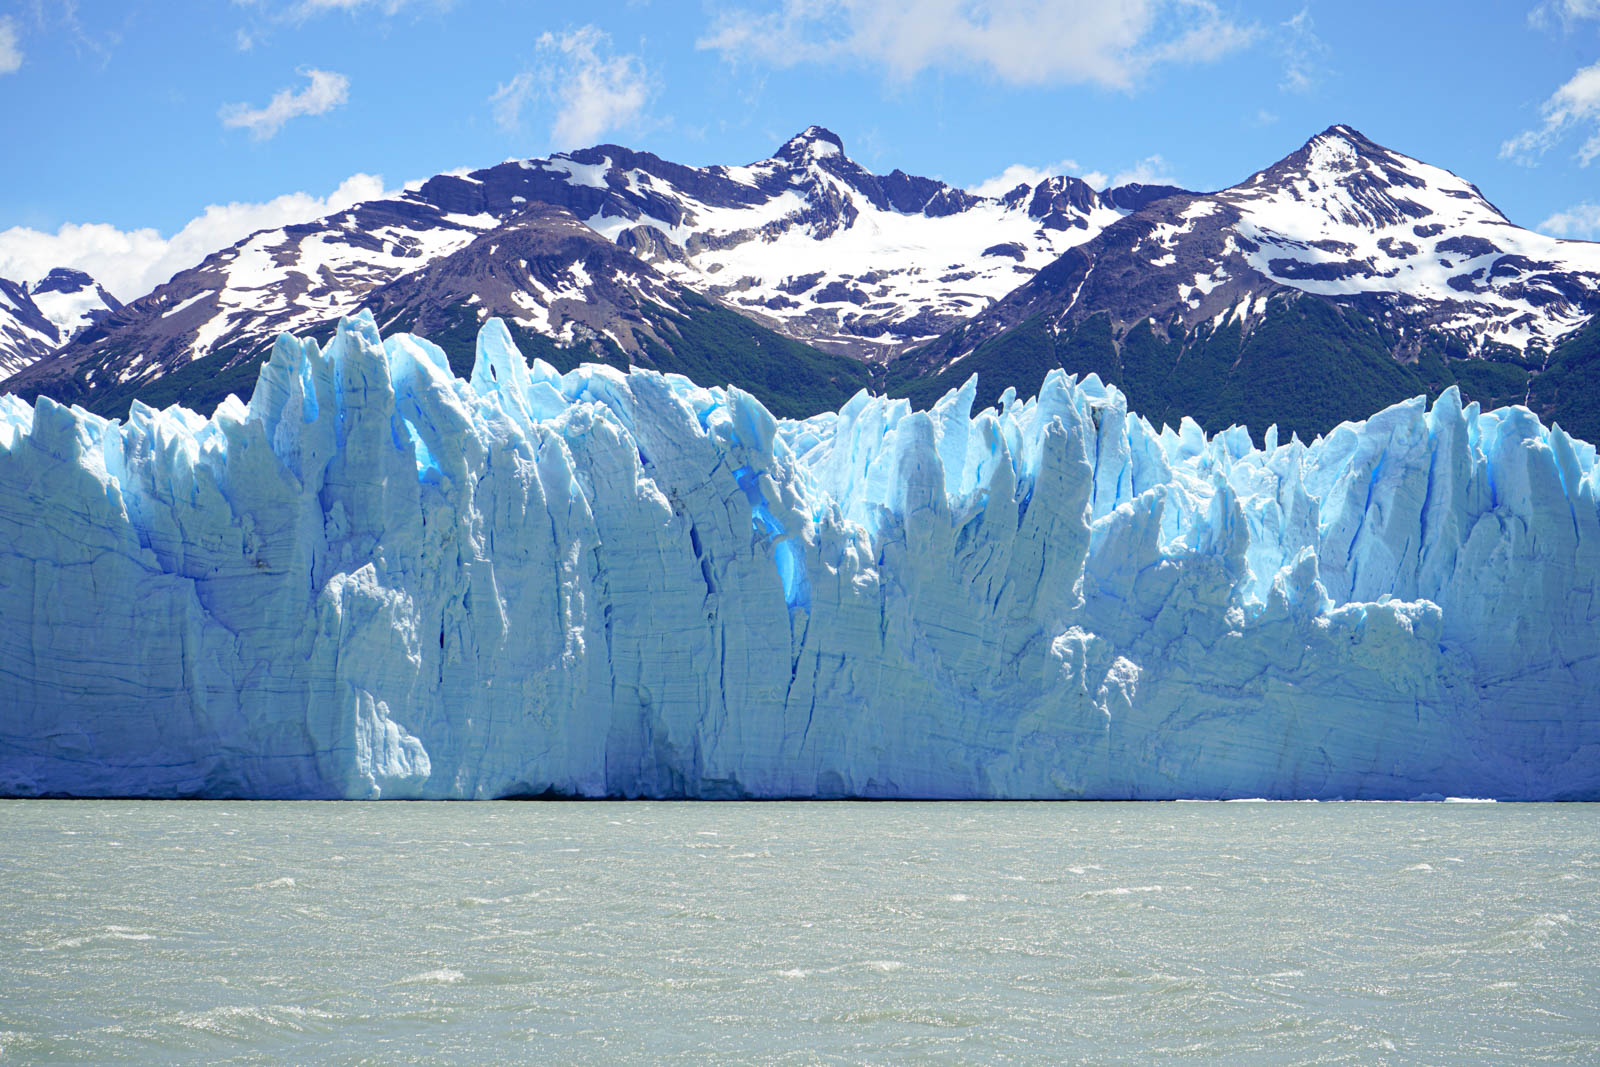 Side view of the glacier with crevasses